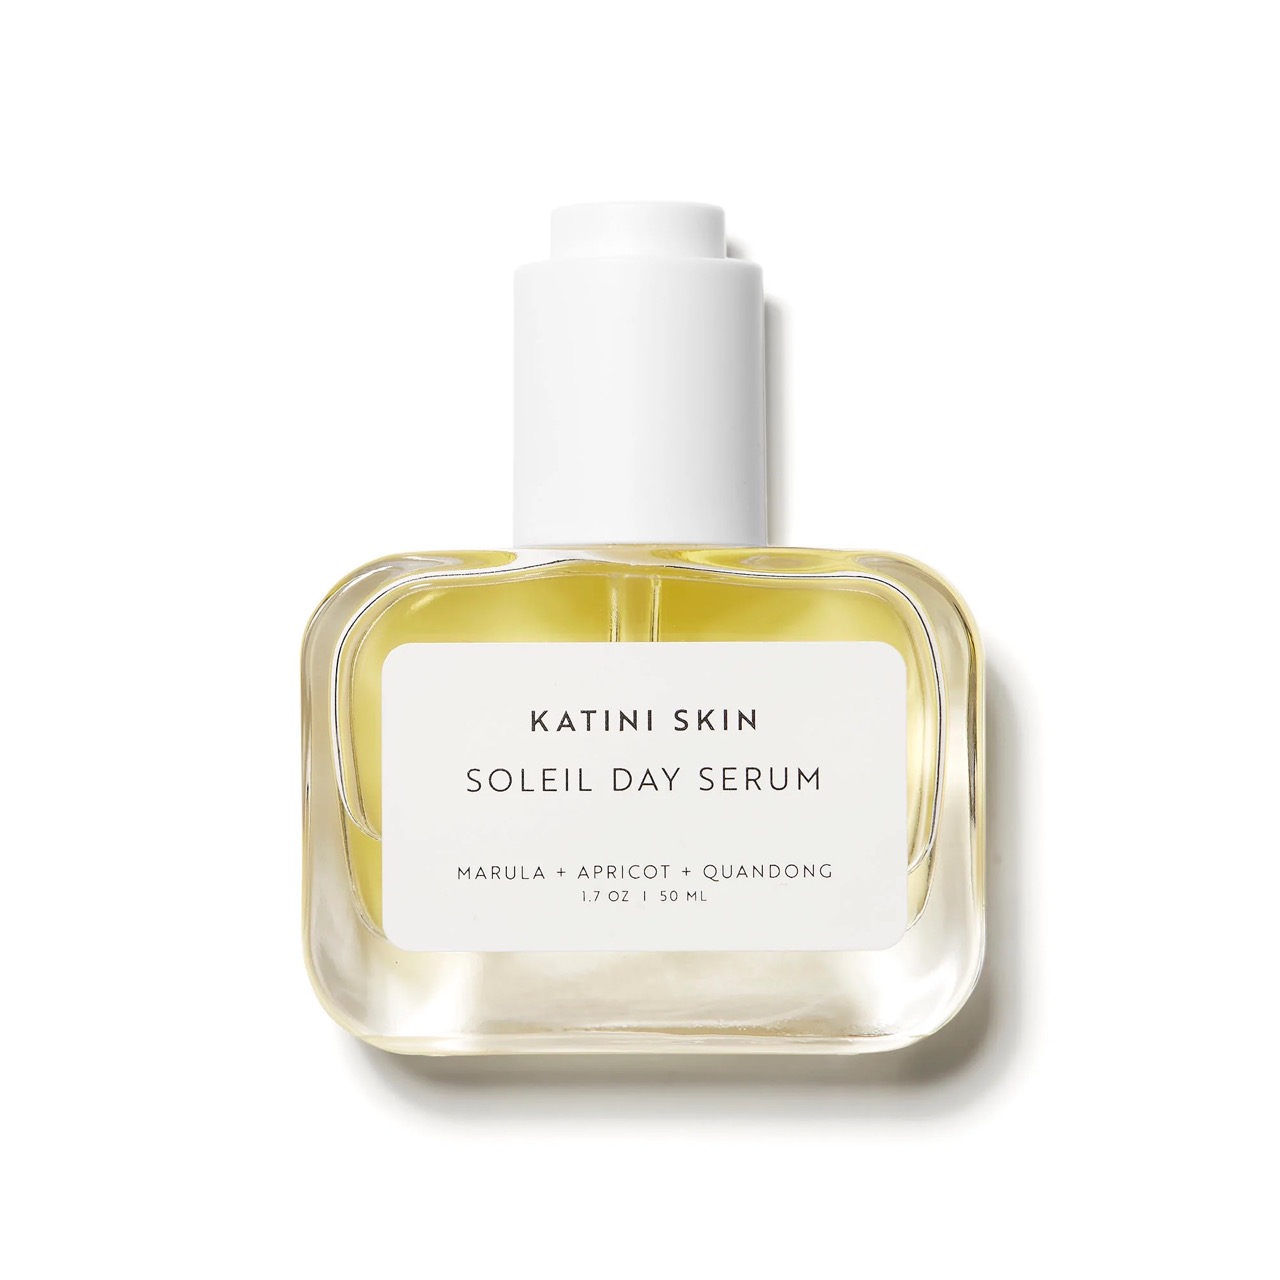 A bottle of the Katini Skin Soleil Day Serum.